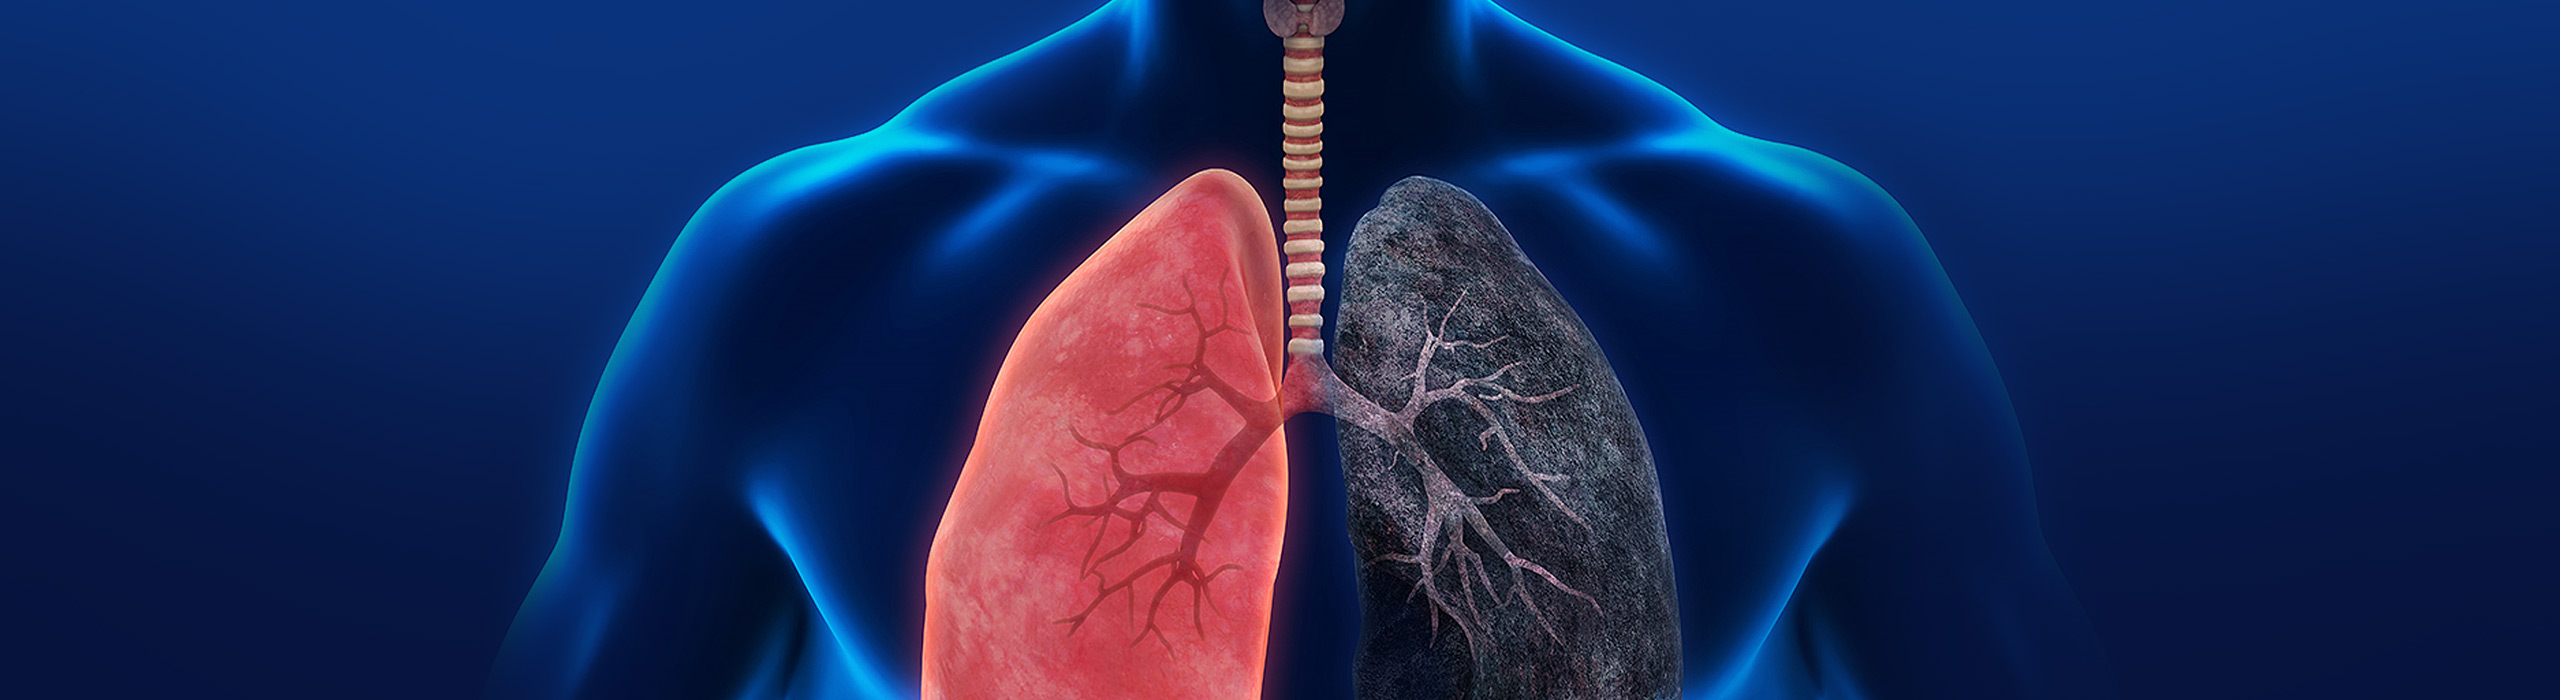 COPD_2560x800